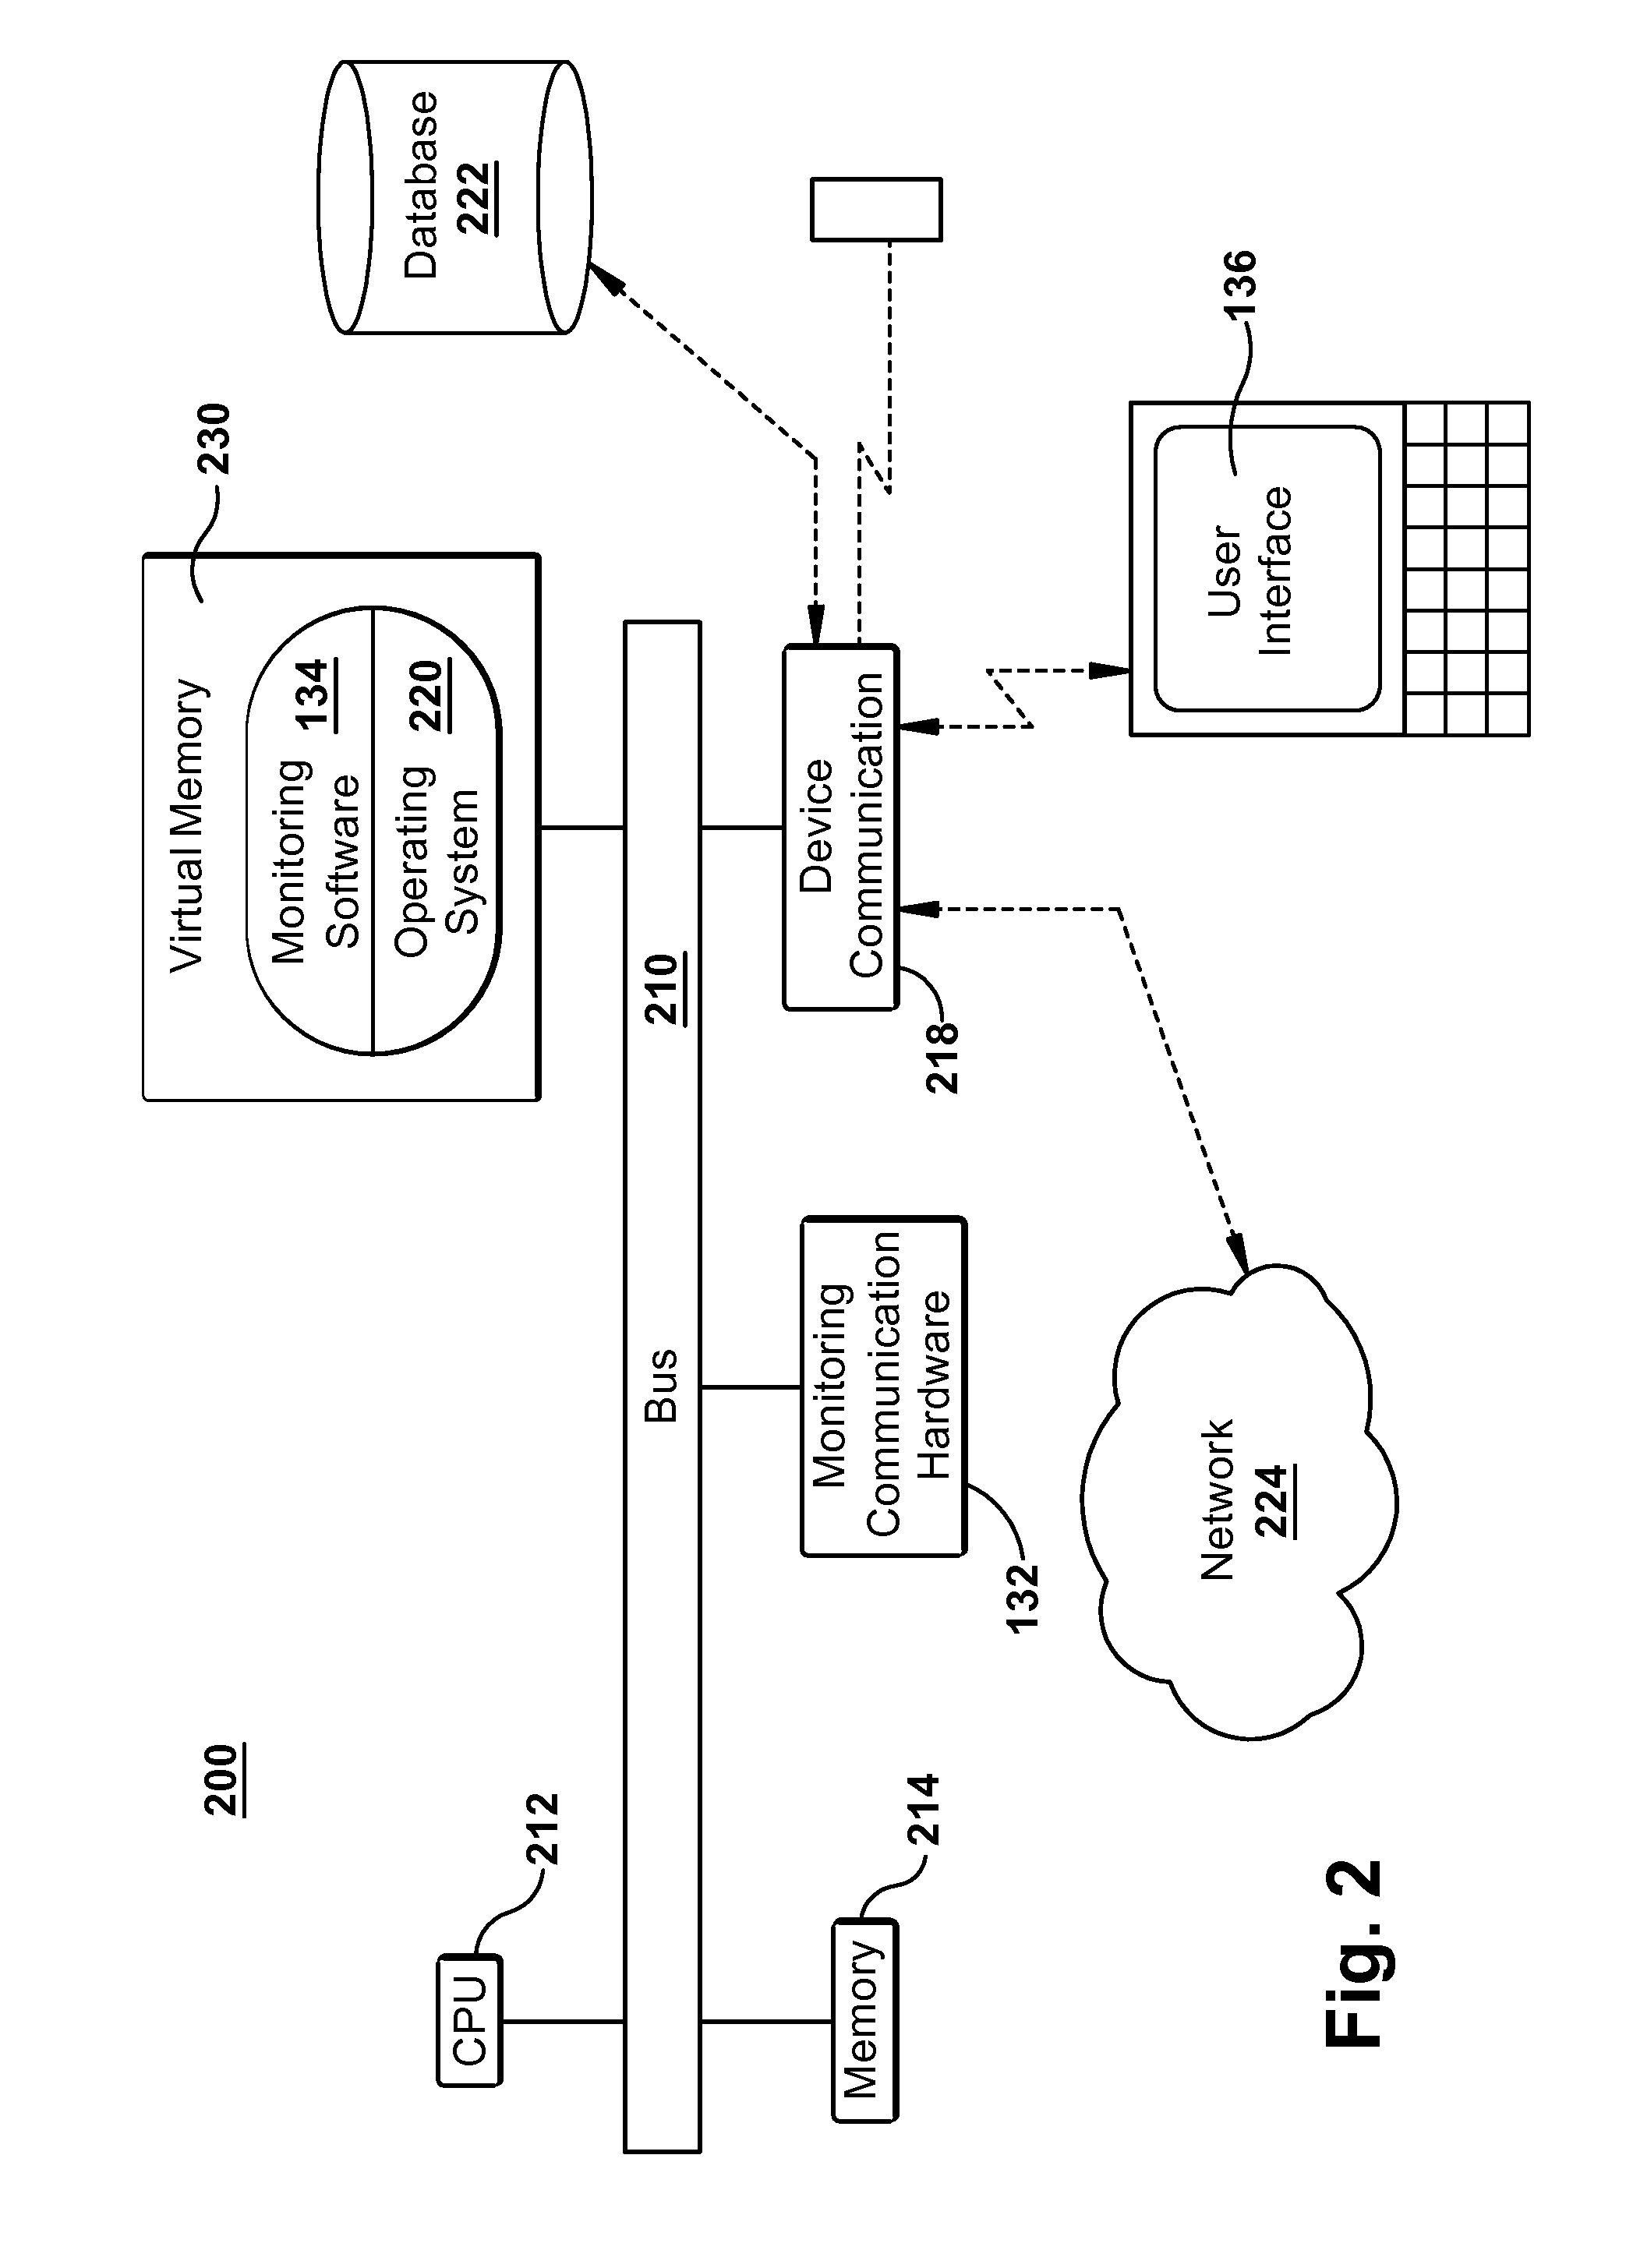 System and method for equipment monitoring component configuration